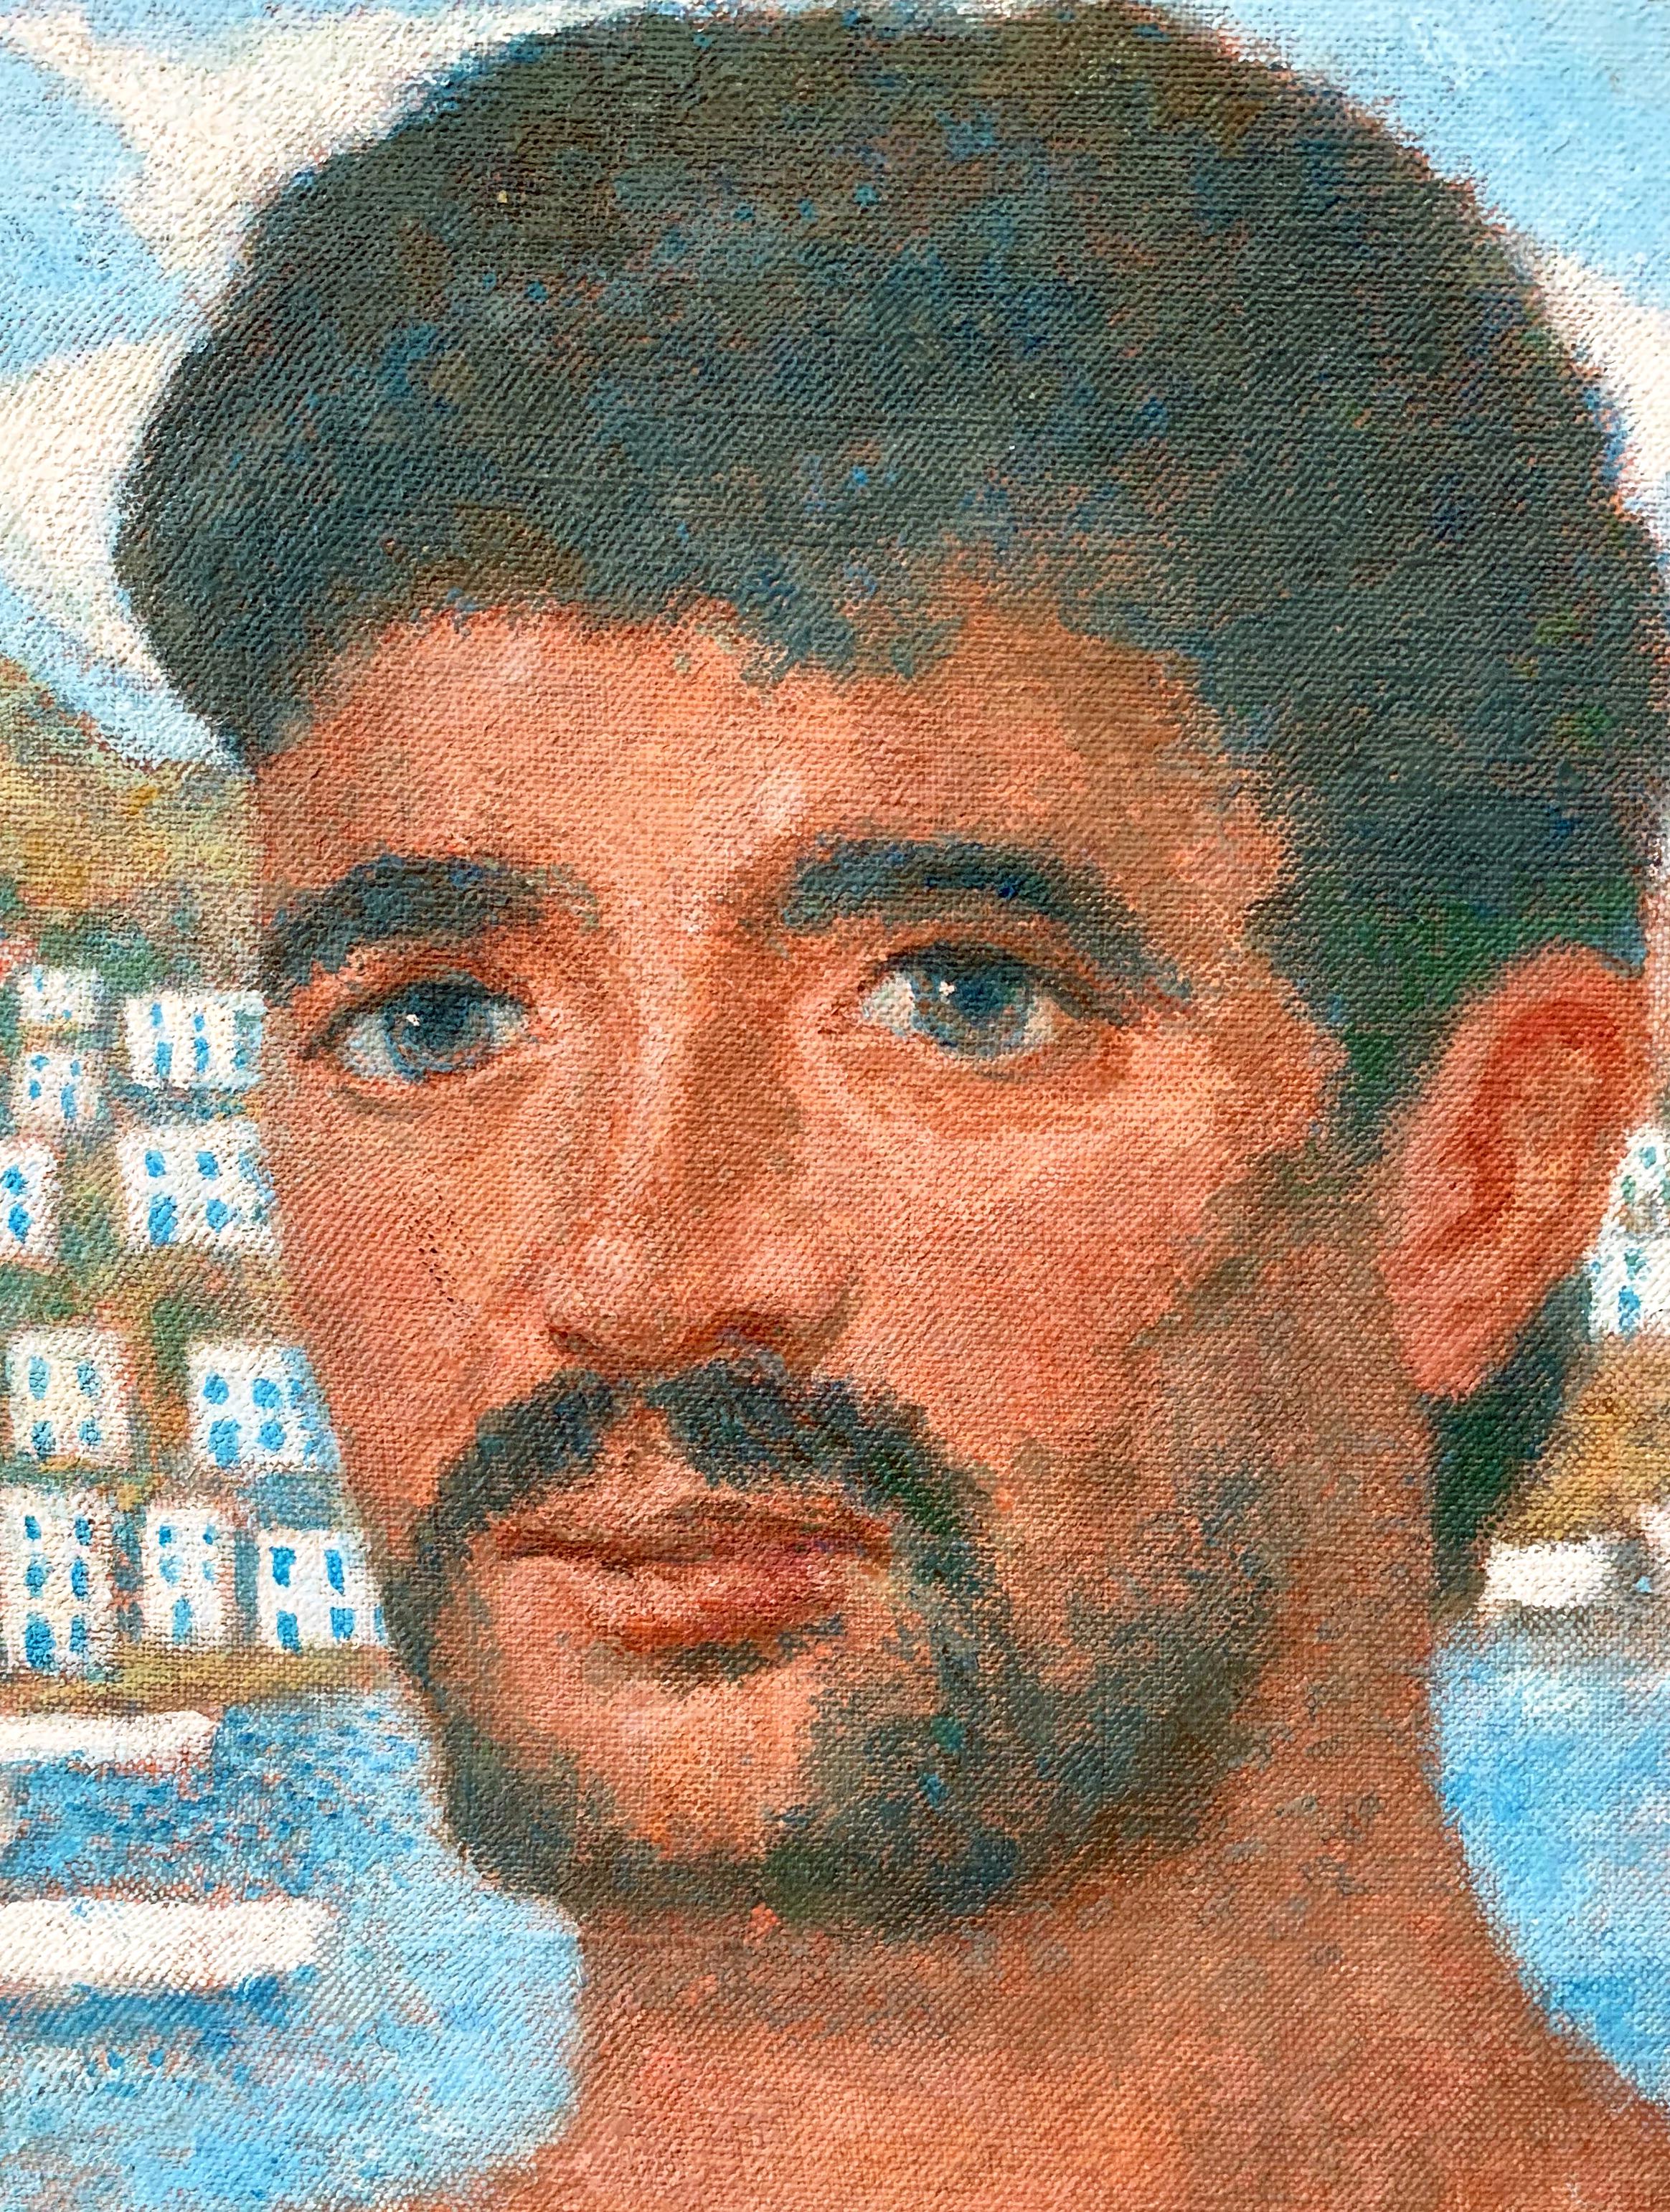 Vividly painted in a palette of white, brilliant blue and ruddy skin tones, this portrait of a bearded Greek youth with ruddy complexion and green eyes was painted by Julius Bloch in the late 1950s or early 1960s. Bloch was fascinated by African